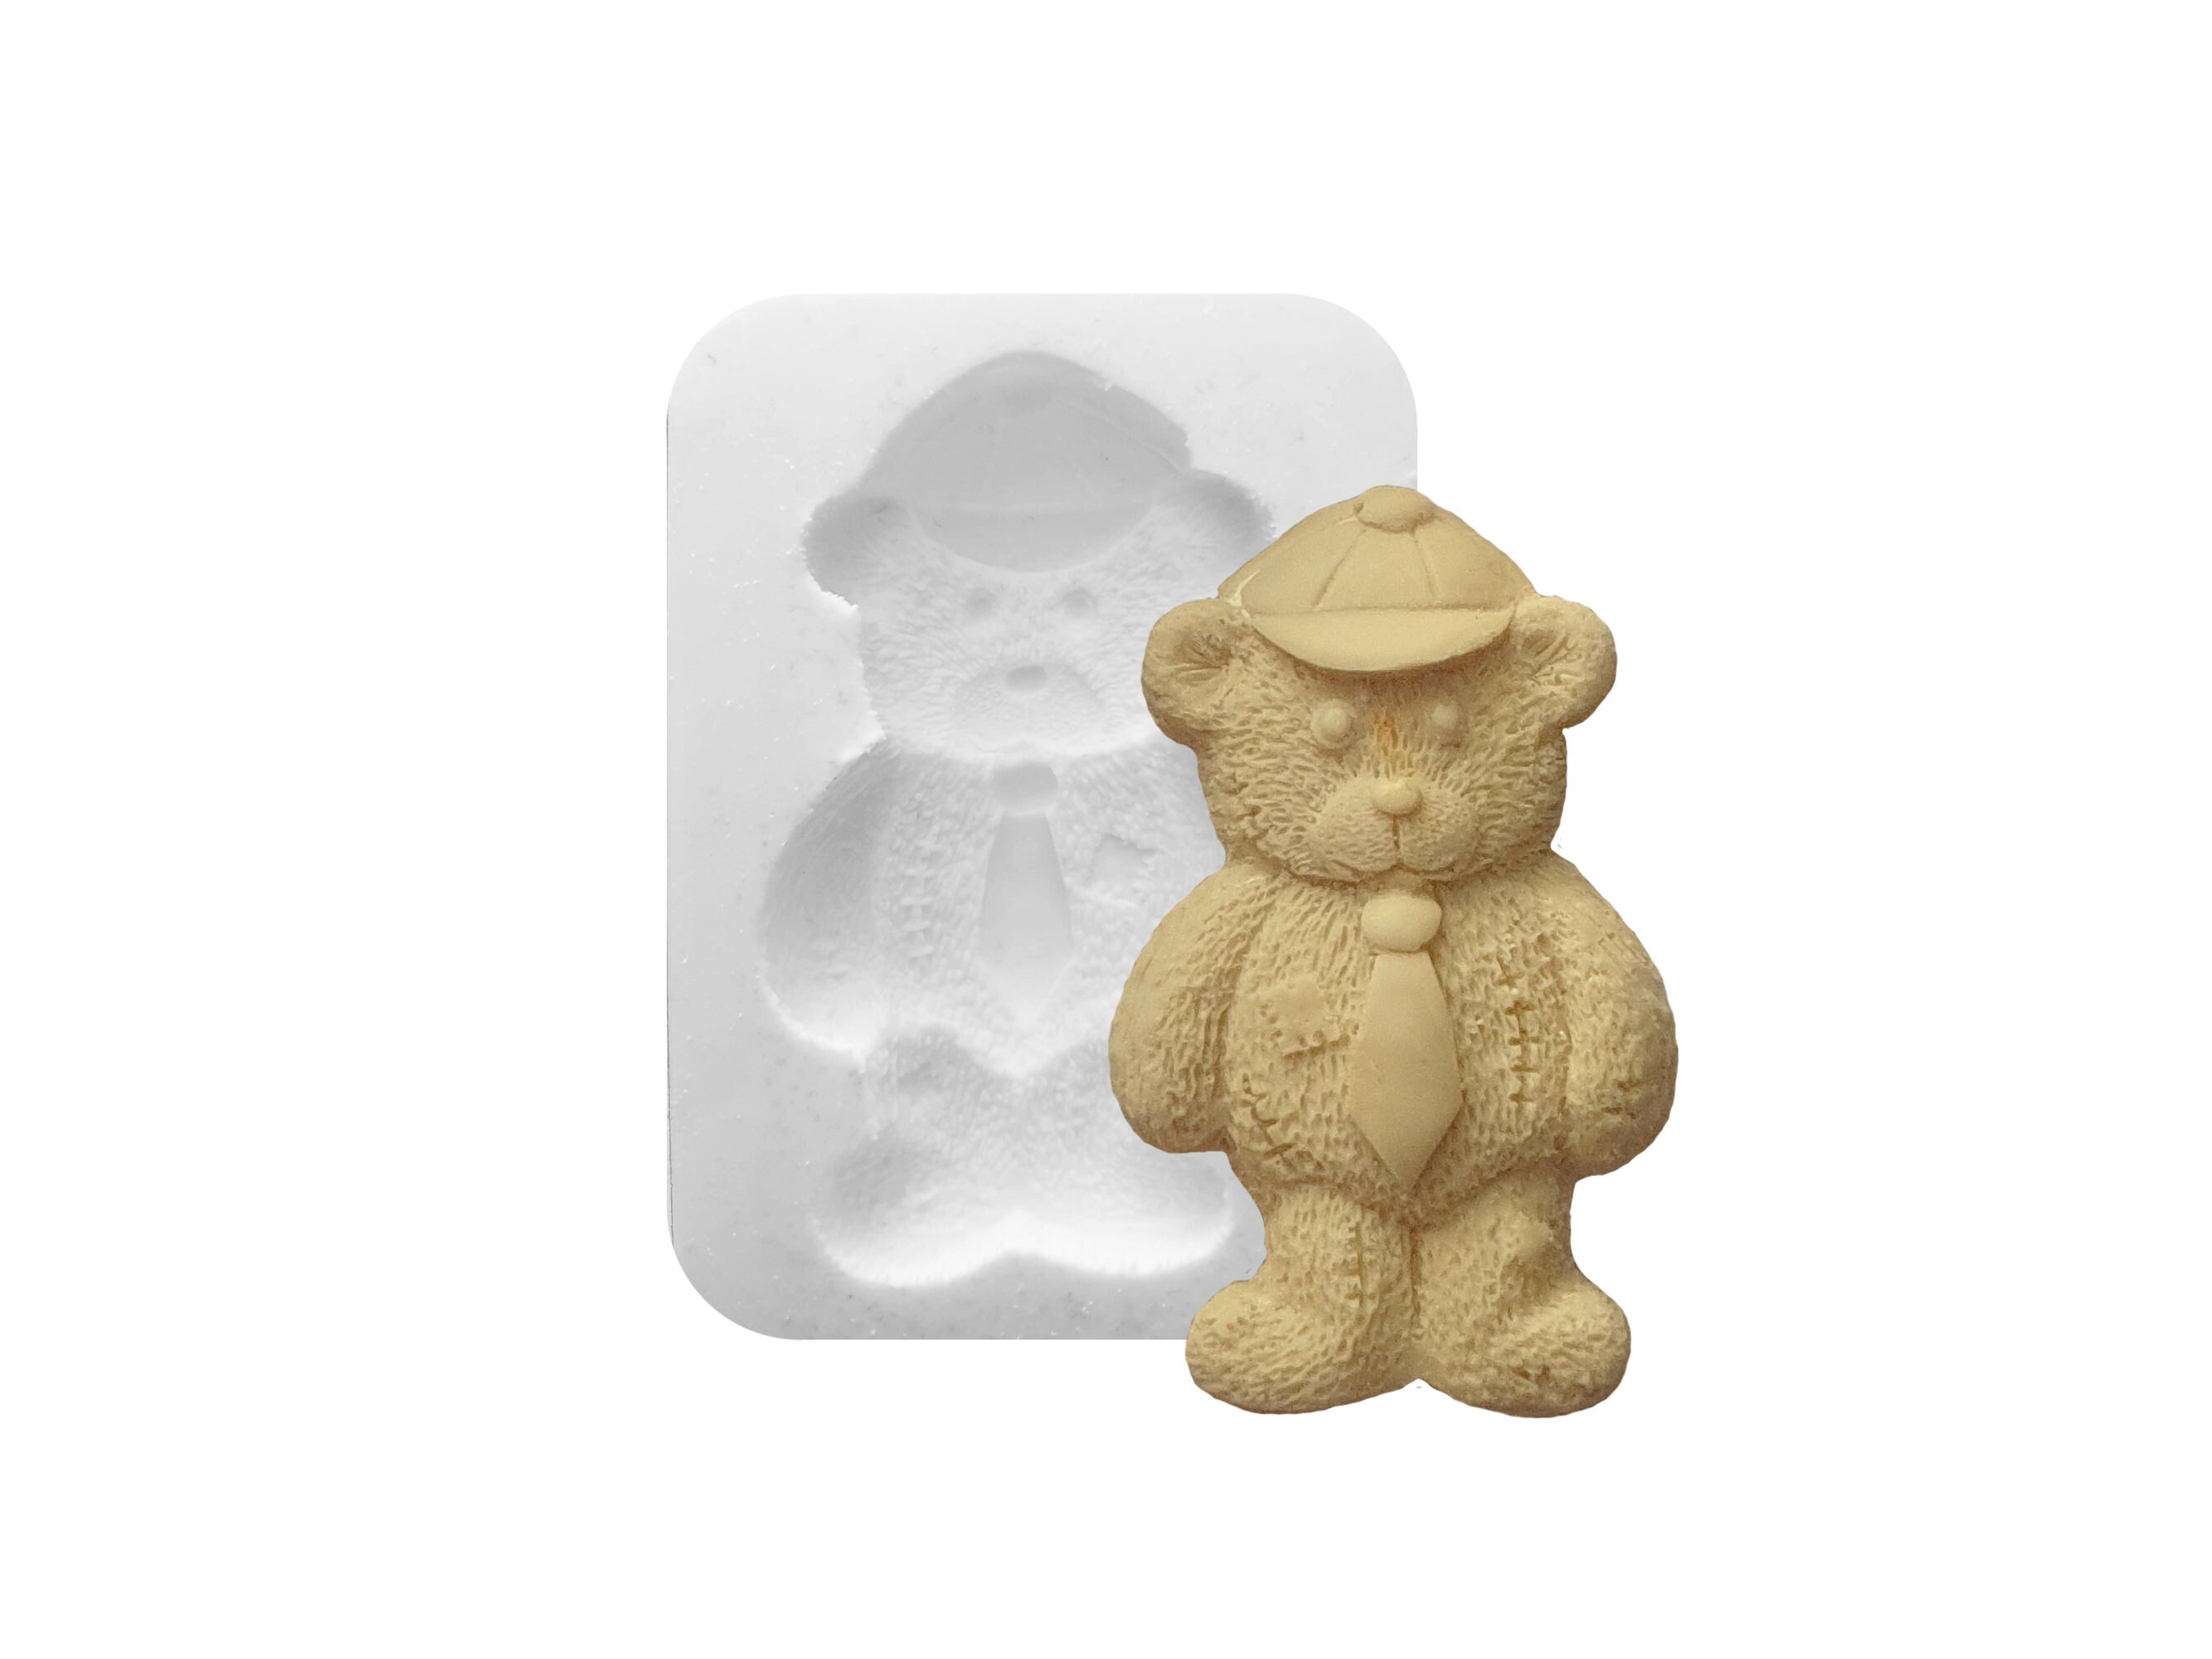 Surglam Soap Moulds Silicone Little Boy and Girl Wedding Cake Decorating Silicon Moulds Medium Size 